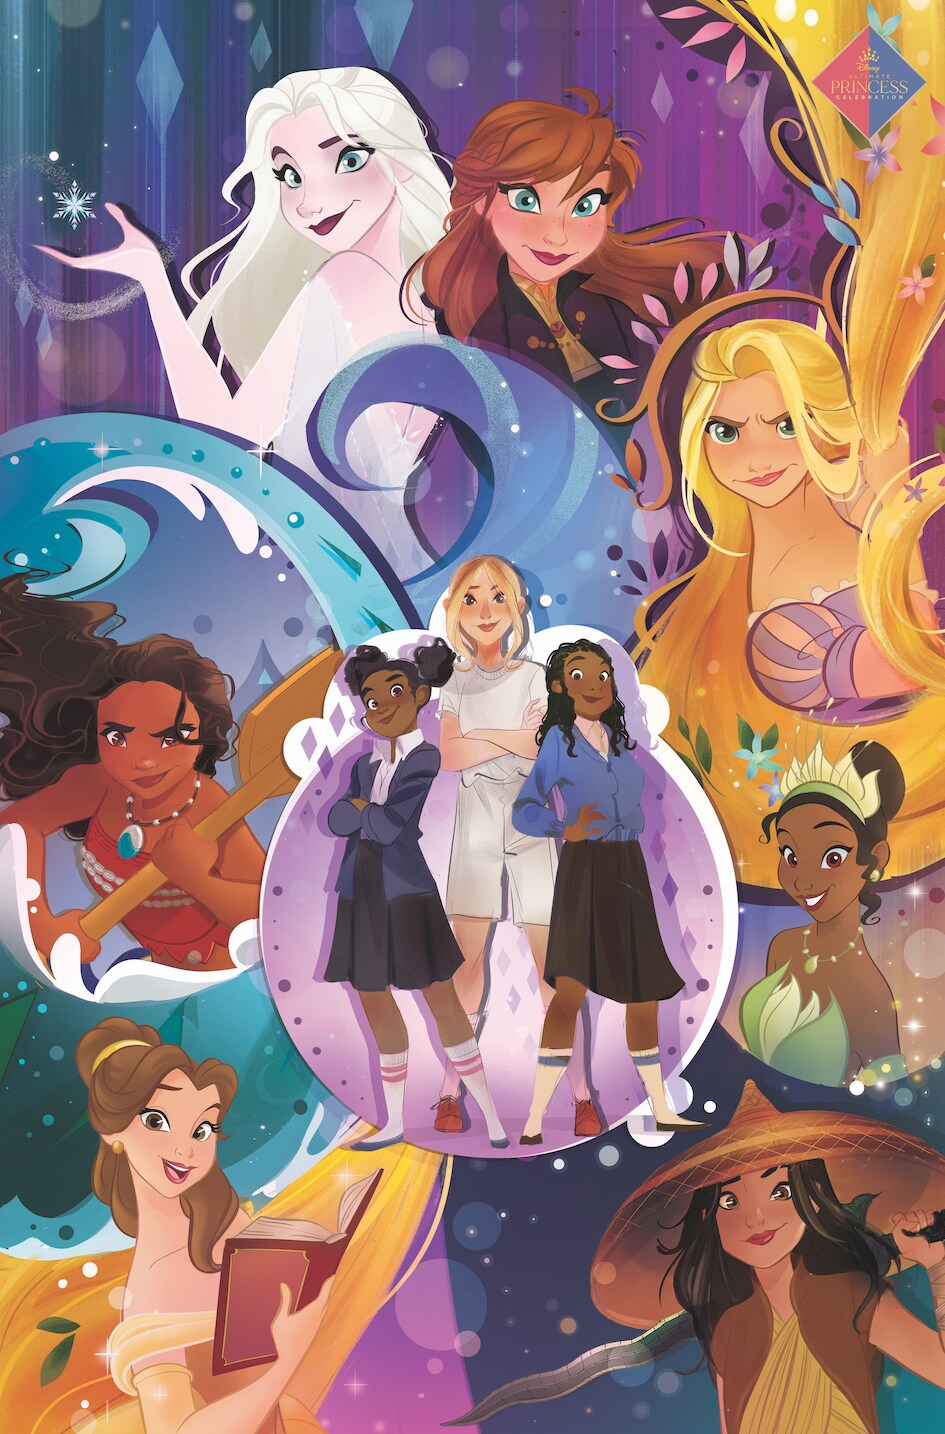 DISNEY PRINCESS AND THE FEMALE LEAD TEAM UP TO BOOST CONFIDENCE IN KIDS